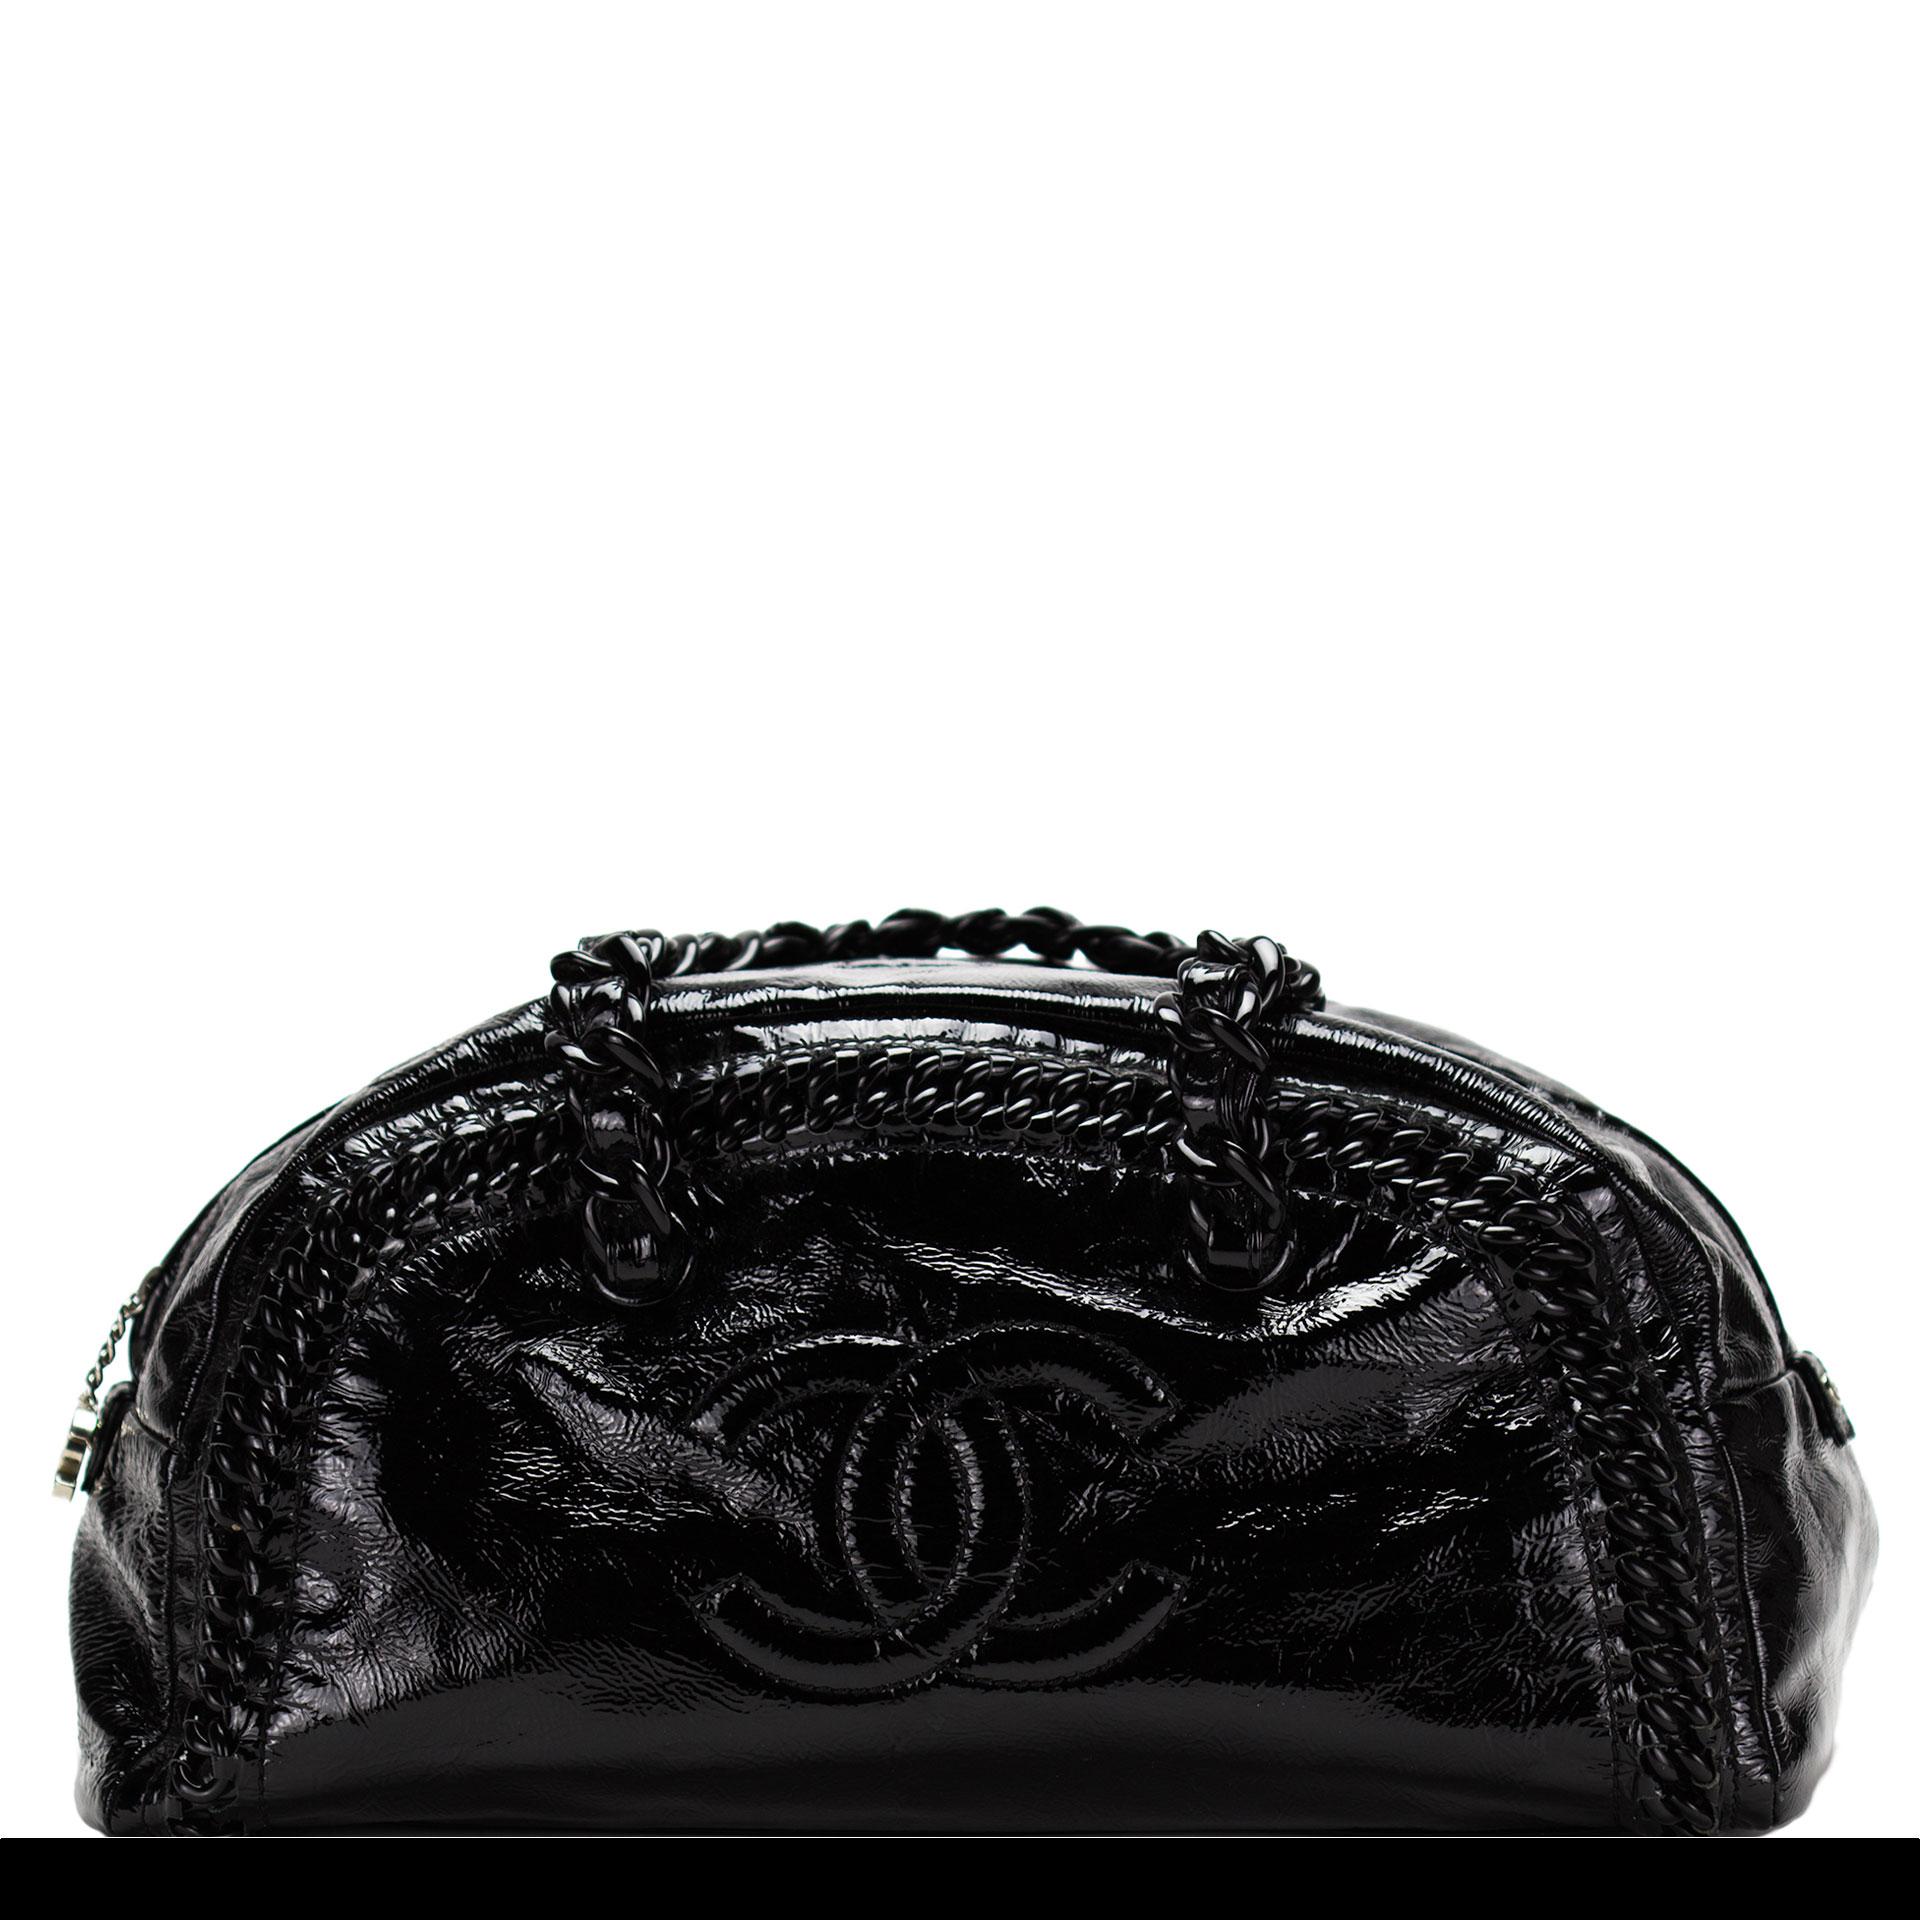 Black Chanel 2008 Bowling XL Satchel Resin Handle Duffel Tote Patent Leather Weekend For Sale